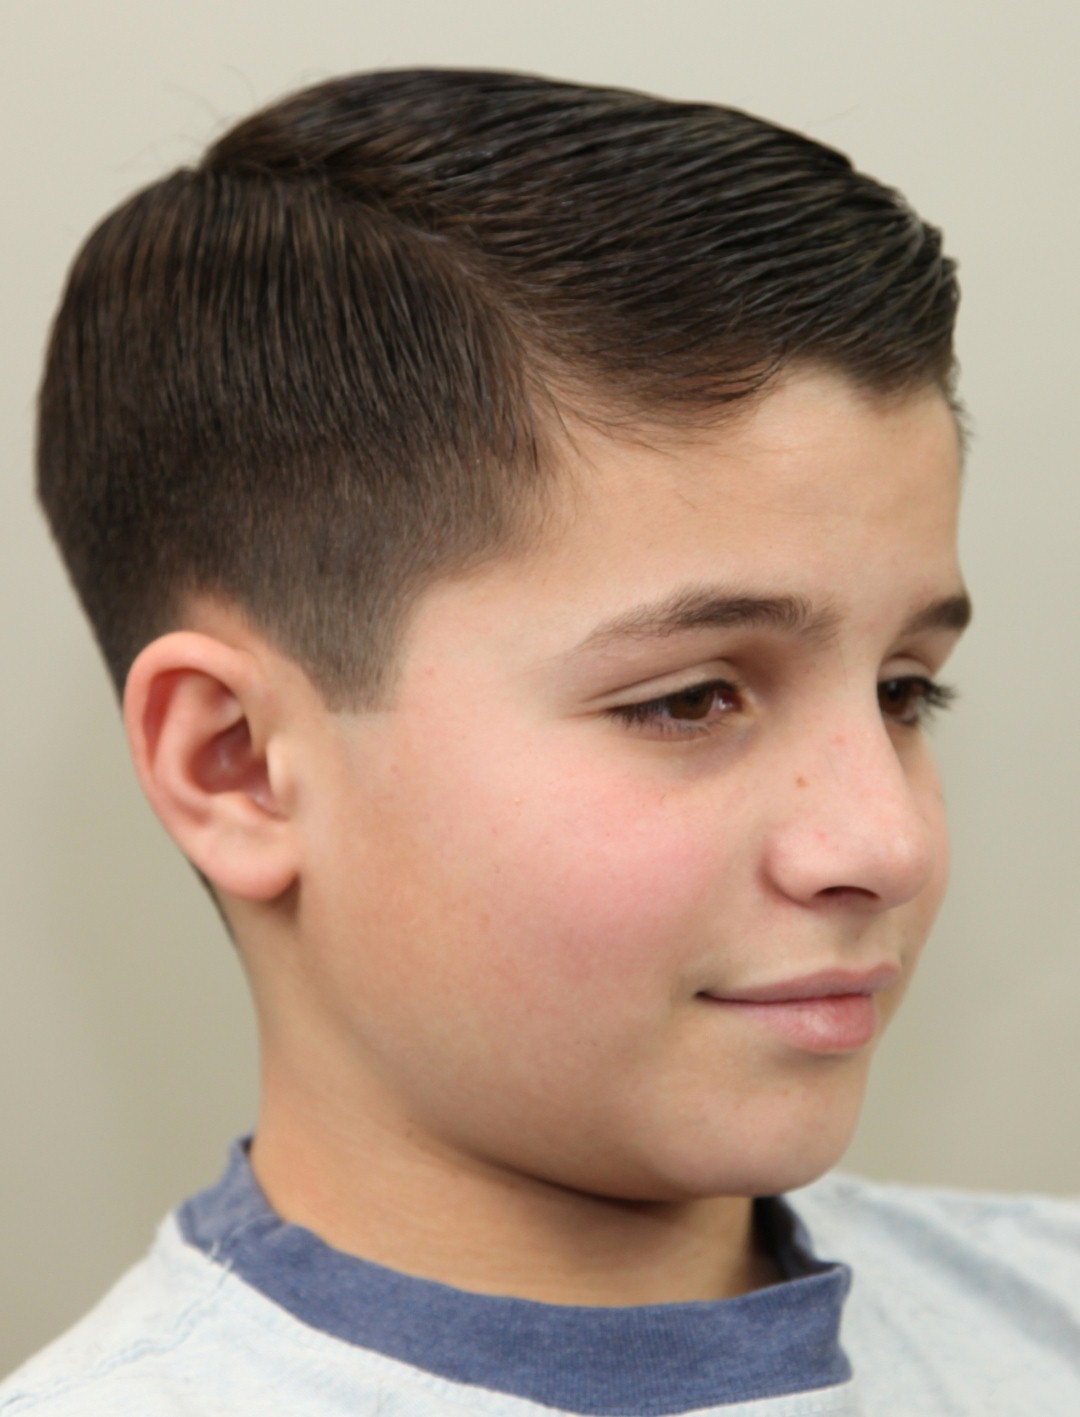 Cool kids hairstyles for boys 2015